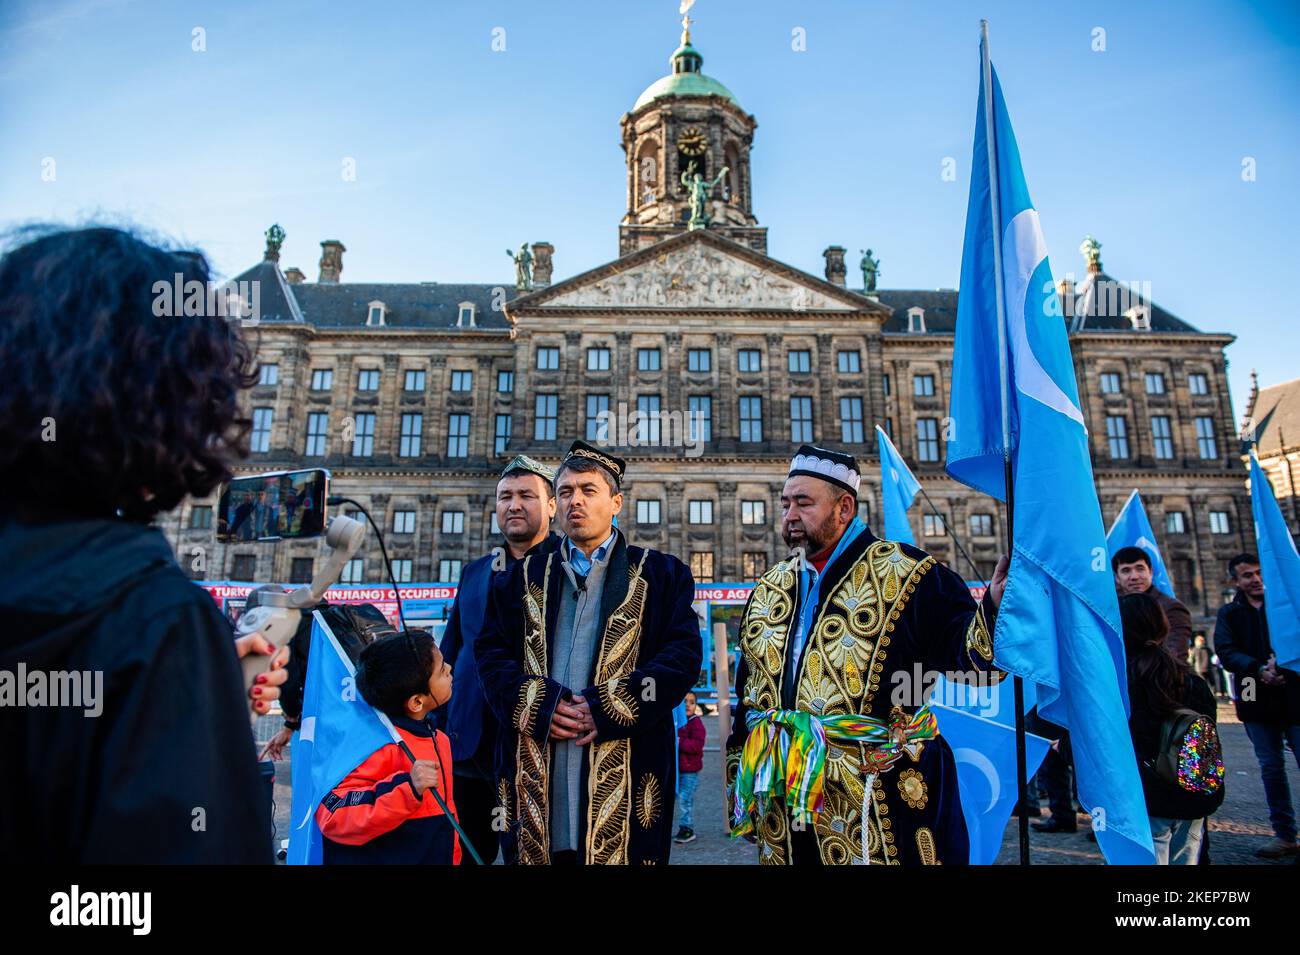 An Uyghur man is seen being interviewed during an event to commemorate the 'National Day of East Turkistan'. November 12th marks the Republic Day of East Turkistan, which is also known as Xinjiang Uyghur Autonomous Region of China, the Uyghur community living in The Netherlands, organized an event to commemorate the 'National Day of East Turkistan' and to keep fighting against the Chinese government in order to take back their independence. The Chinese government has reportedly detained more than a million Muslims in reeducation camps. Most of the people who have been arbitrarily detained are Stock Photo